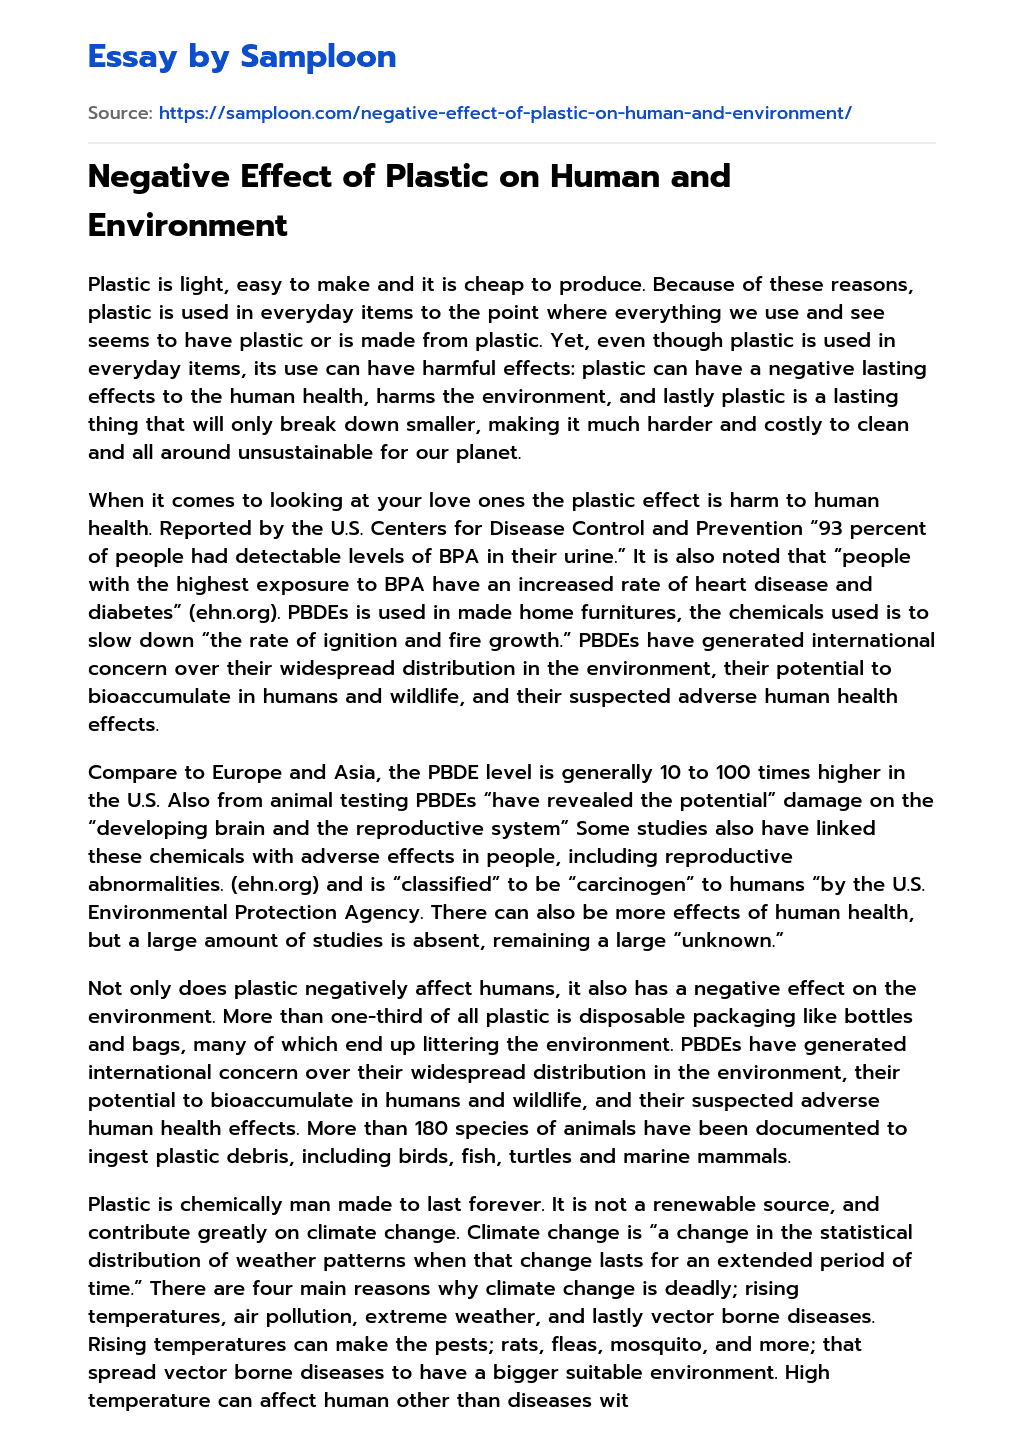 Negative Effect of Plastic on Human and Environment essay